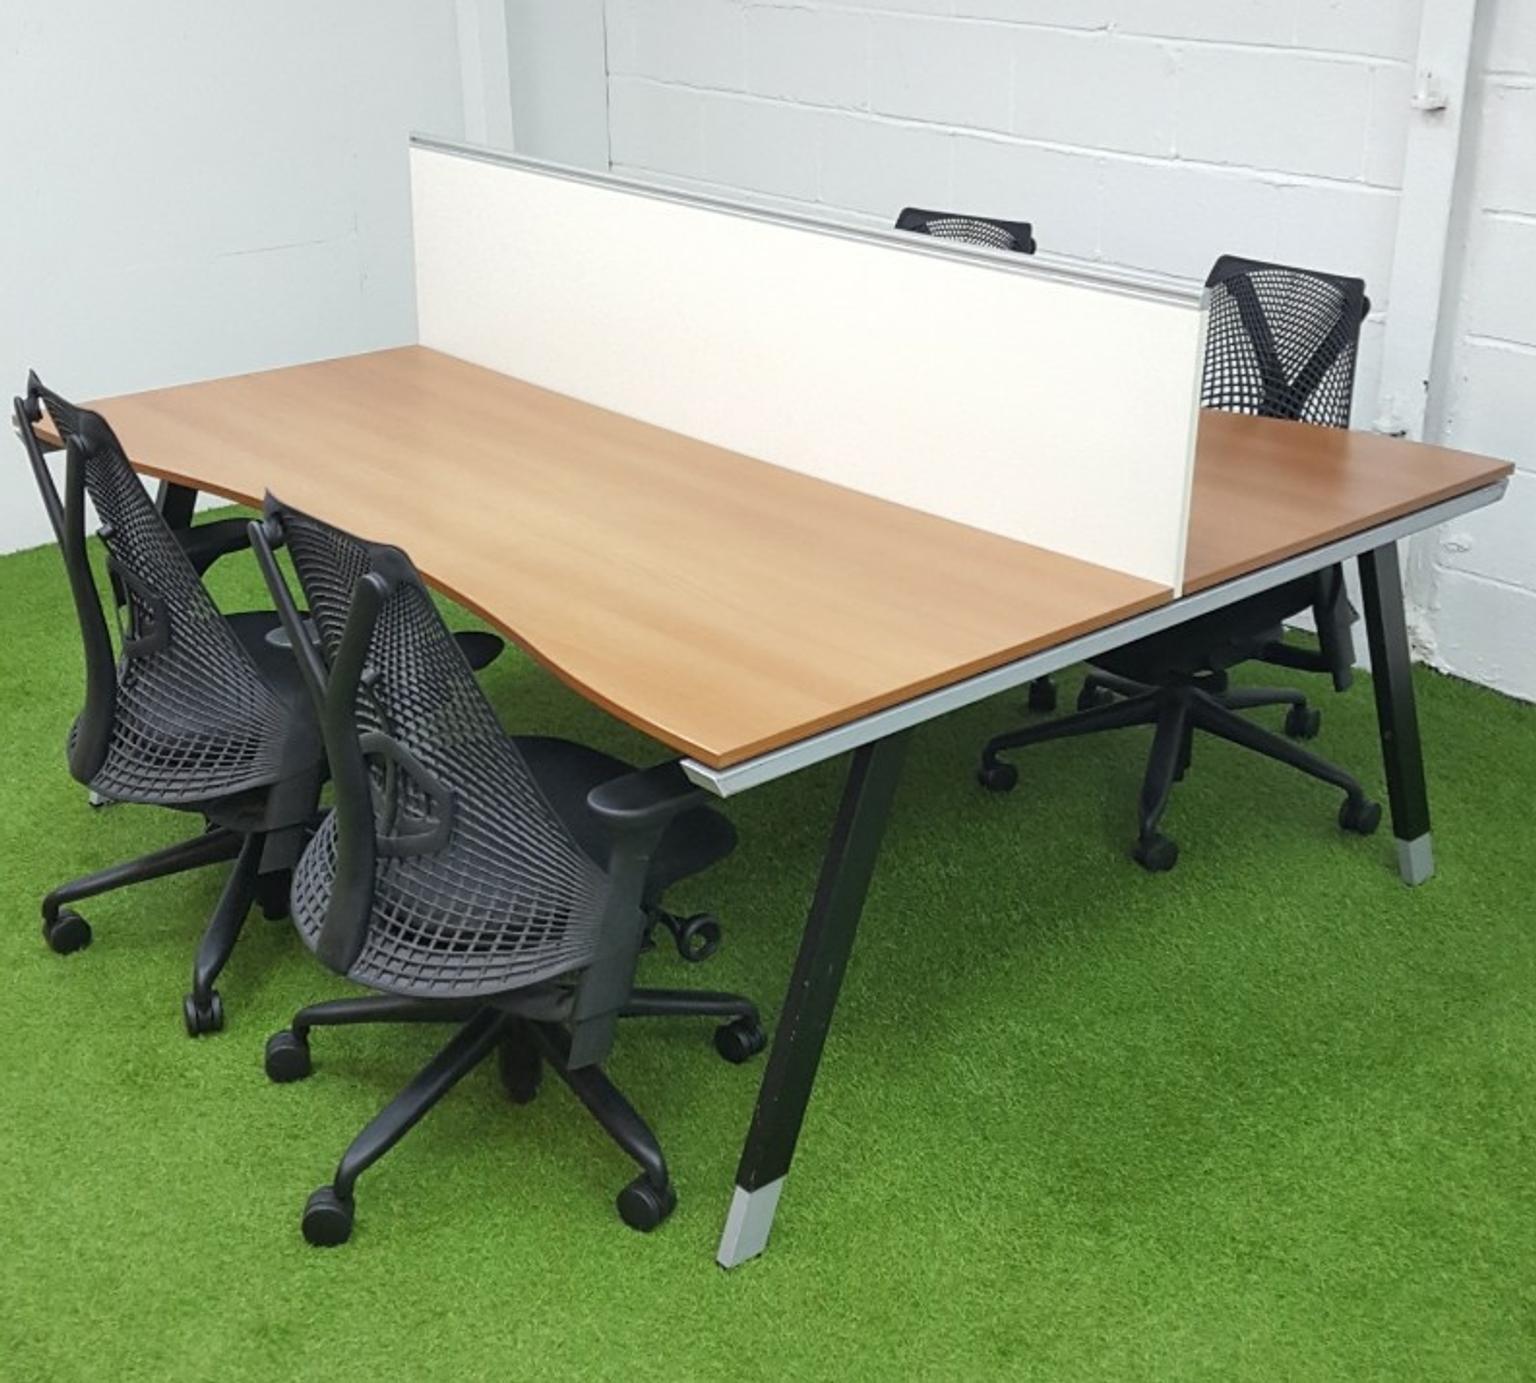 Office Desk Office Furniture Harlow Essex In Cm20 Harlow For